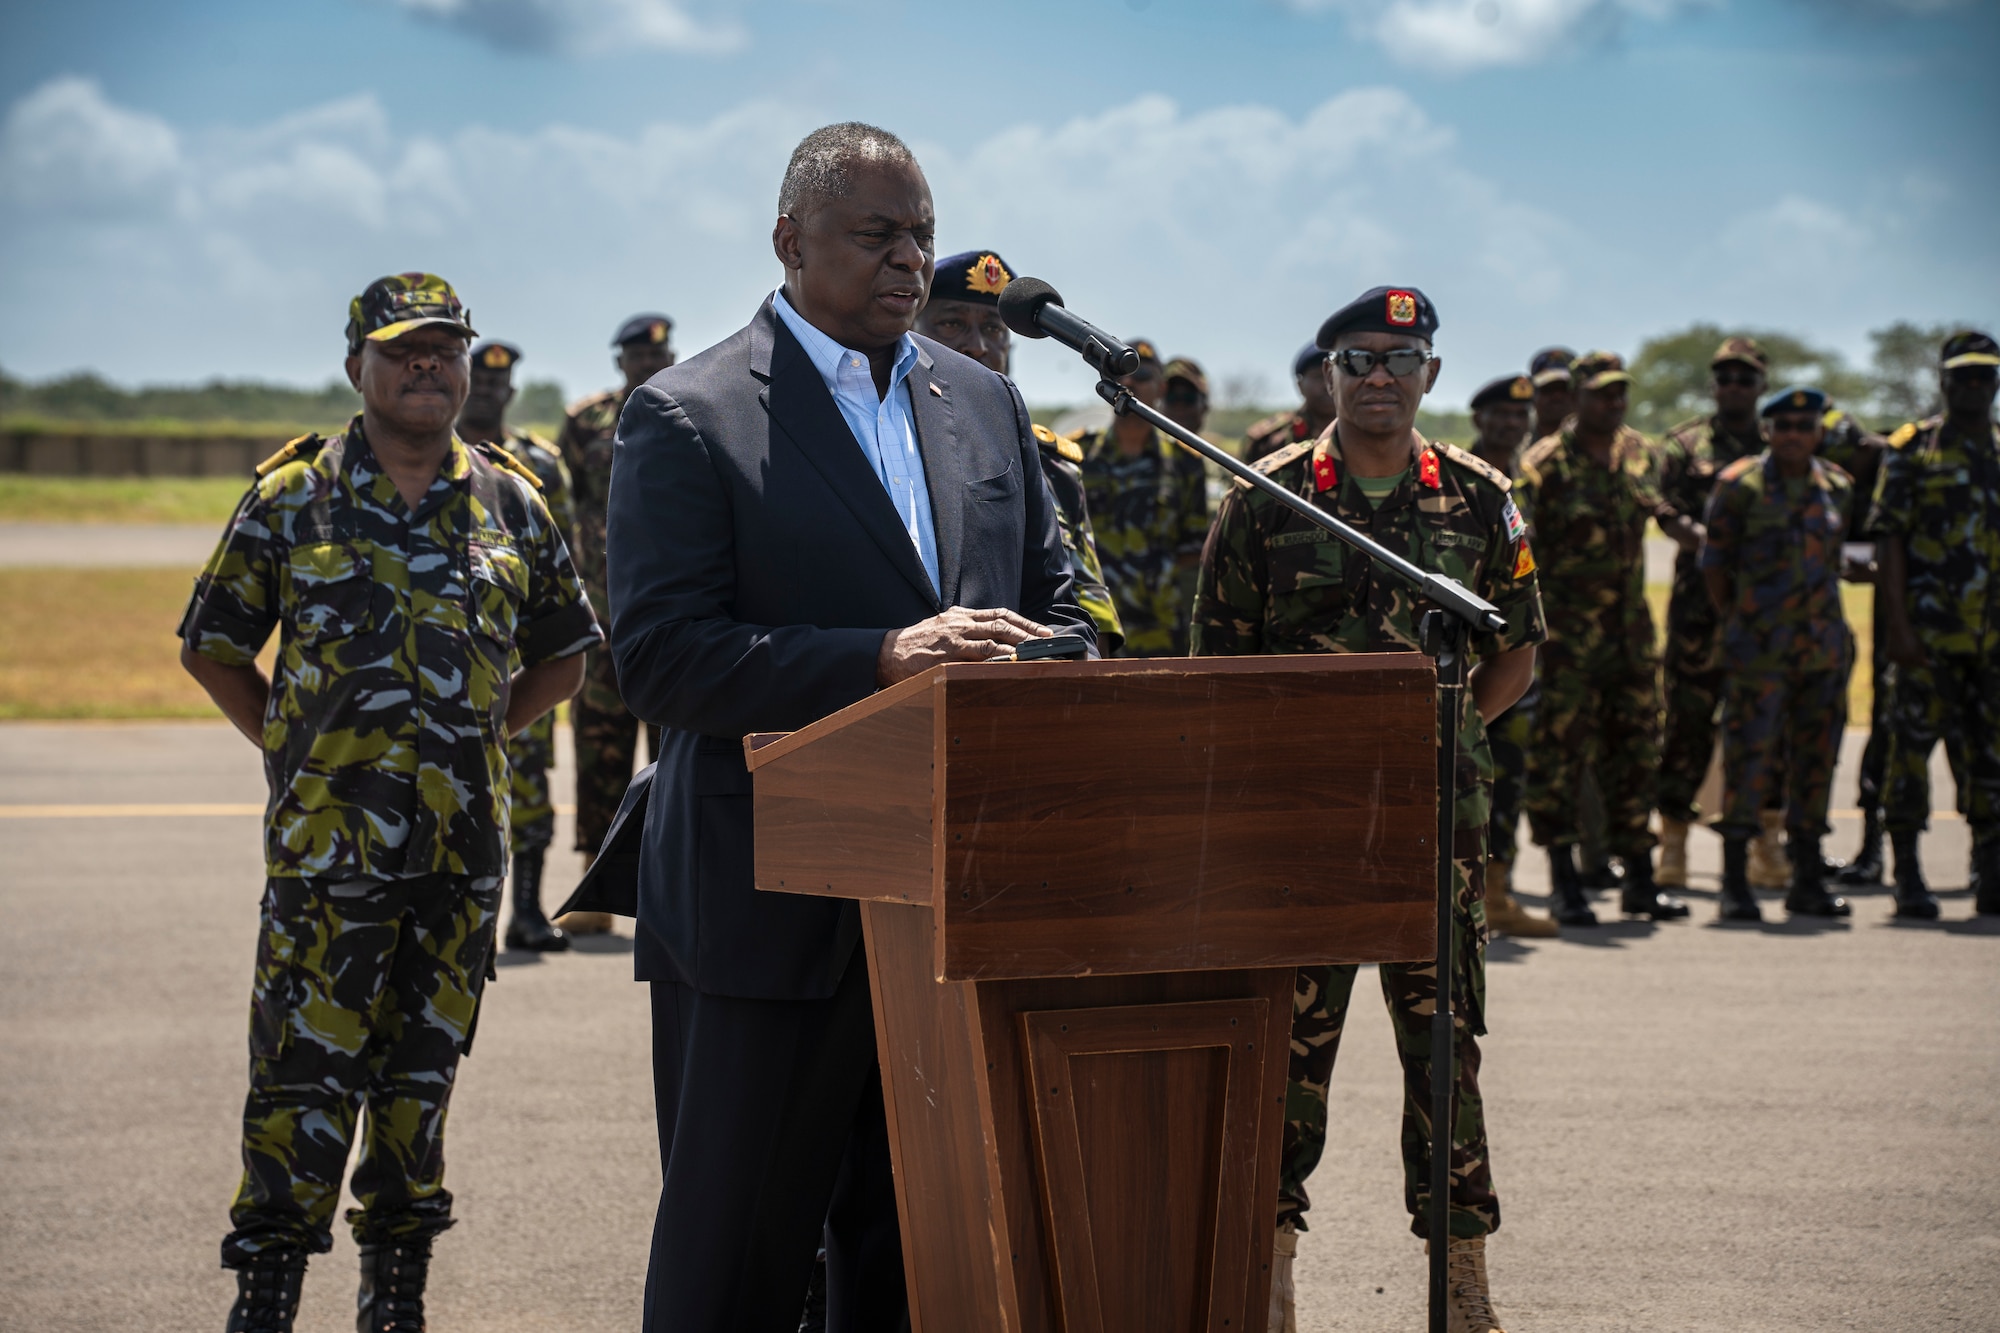 U.S. Secretary of Defense Lloyd J. Austin III speaks with Kenya Defence Forces and U.S. military personnel during a visit to Cooperative Security Location Manda Bay, Kenya,